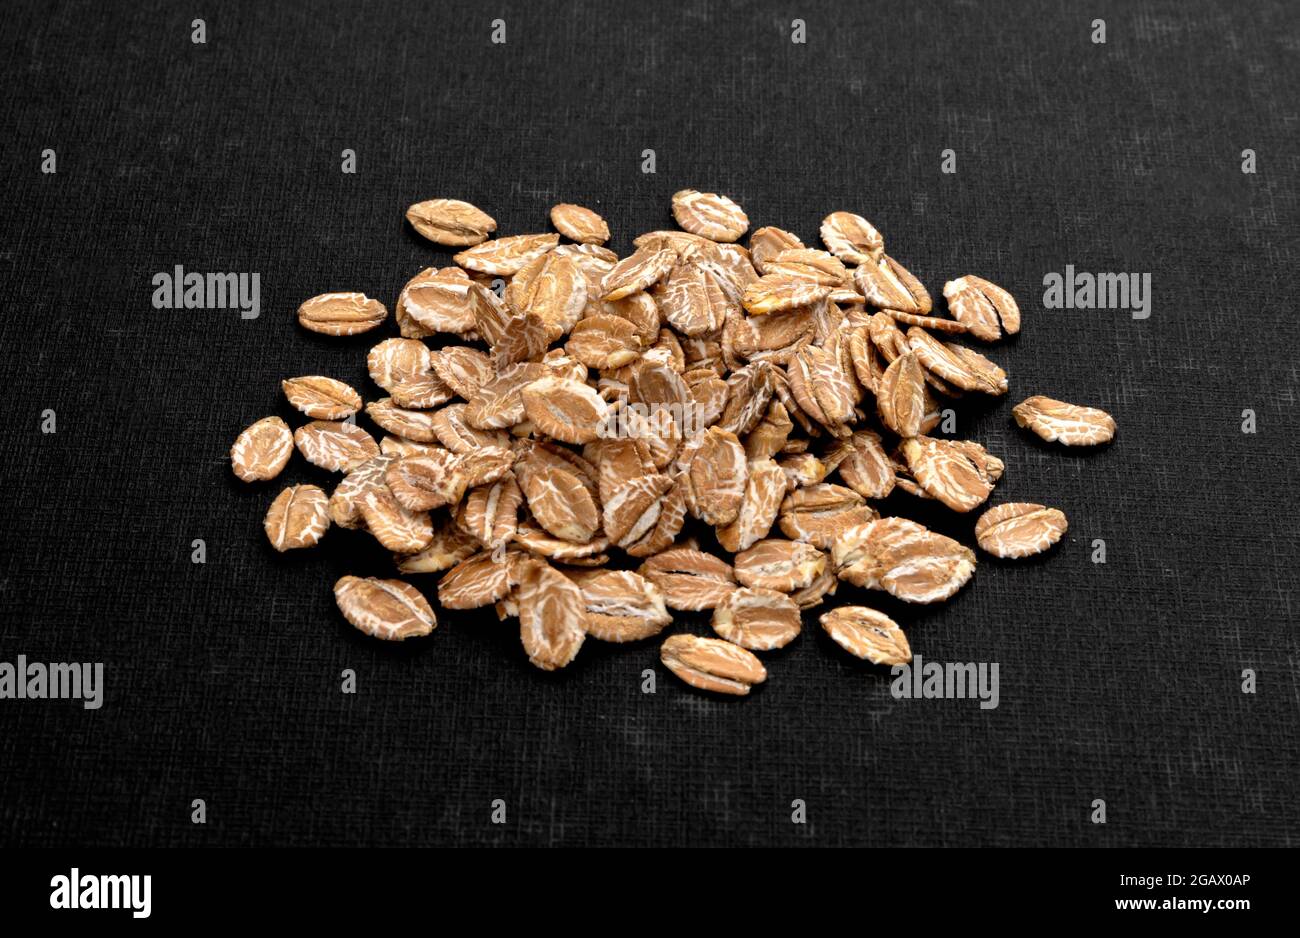 Top view of oat flakes on black background Stock Photo